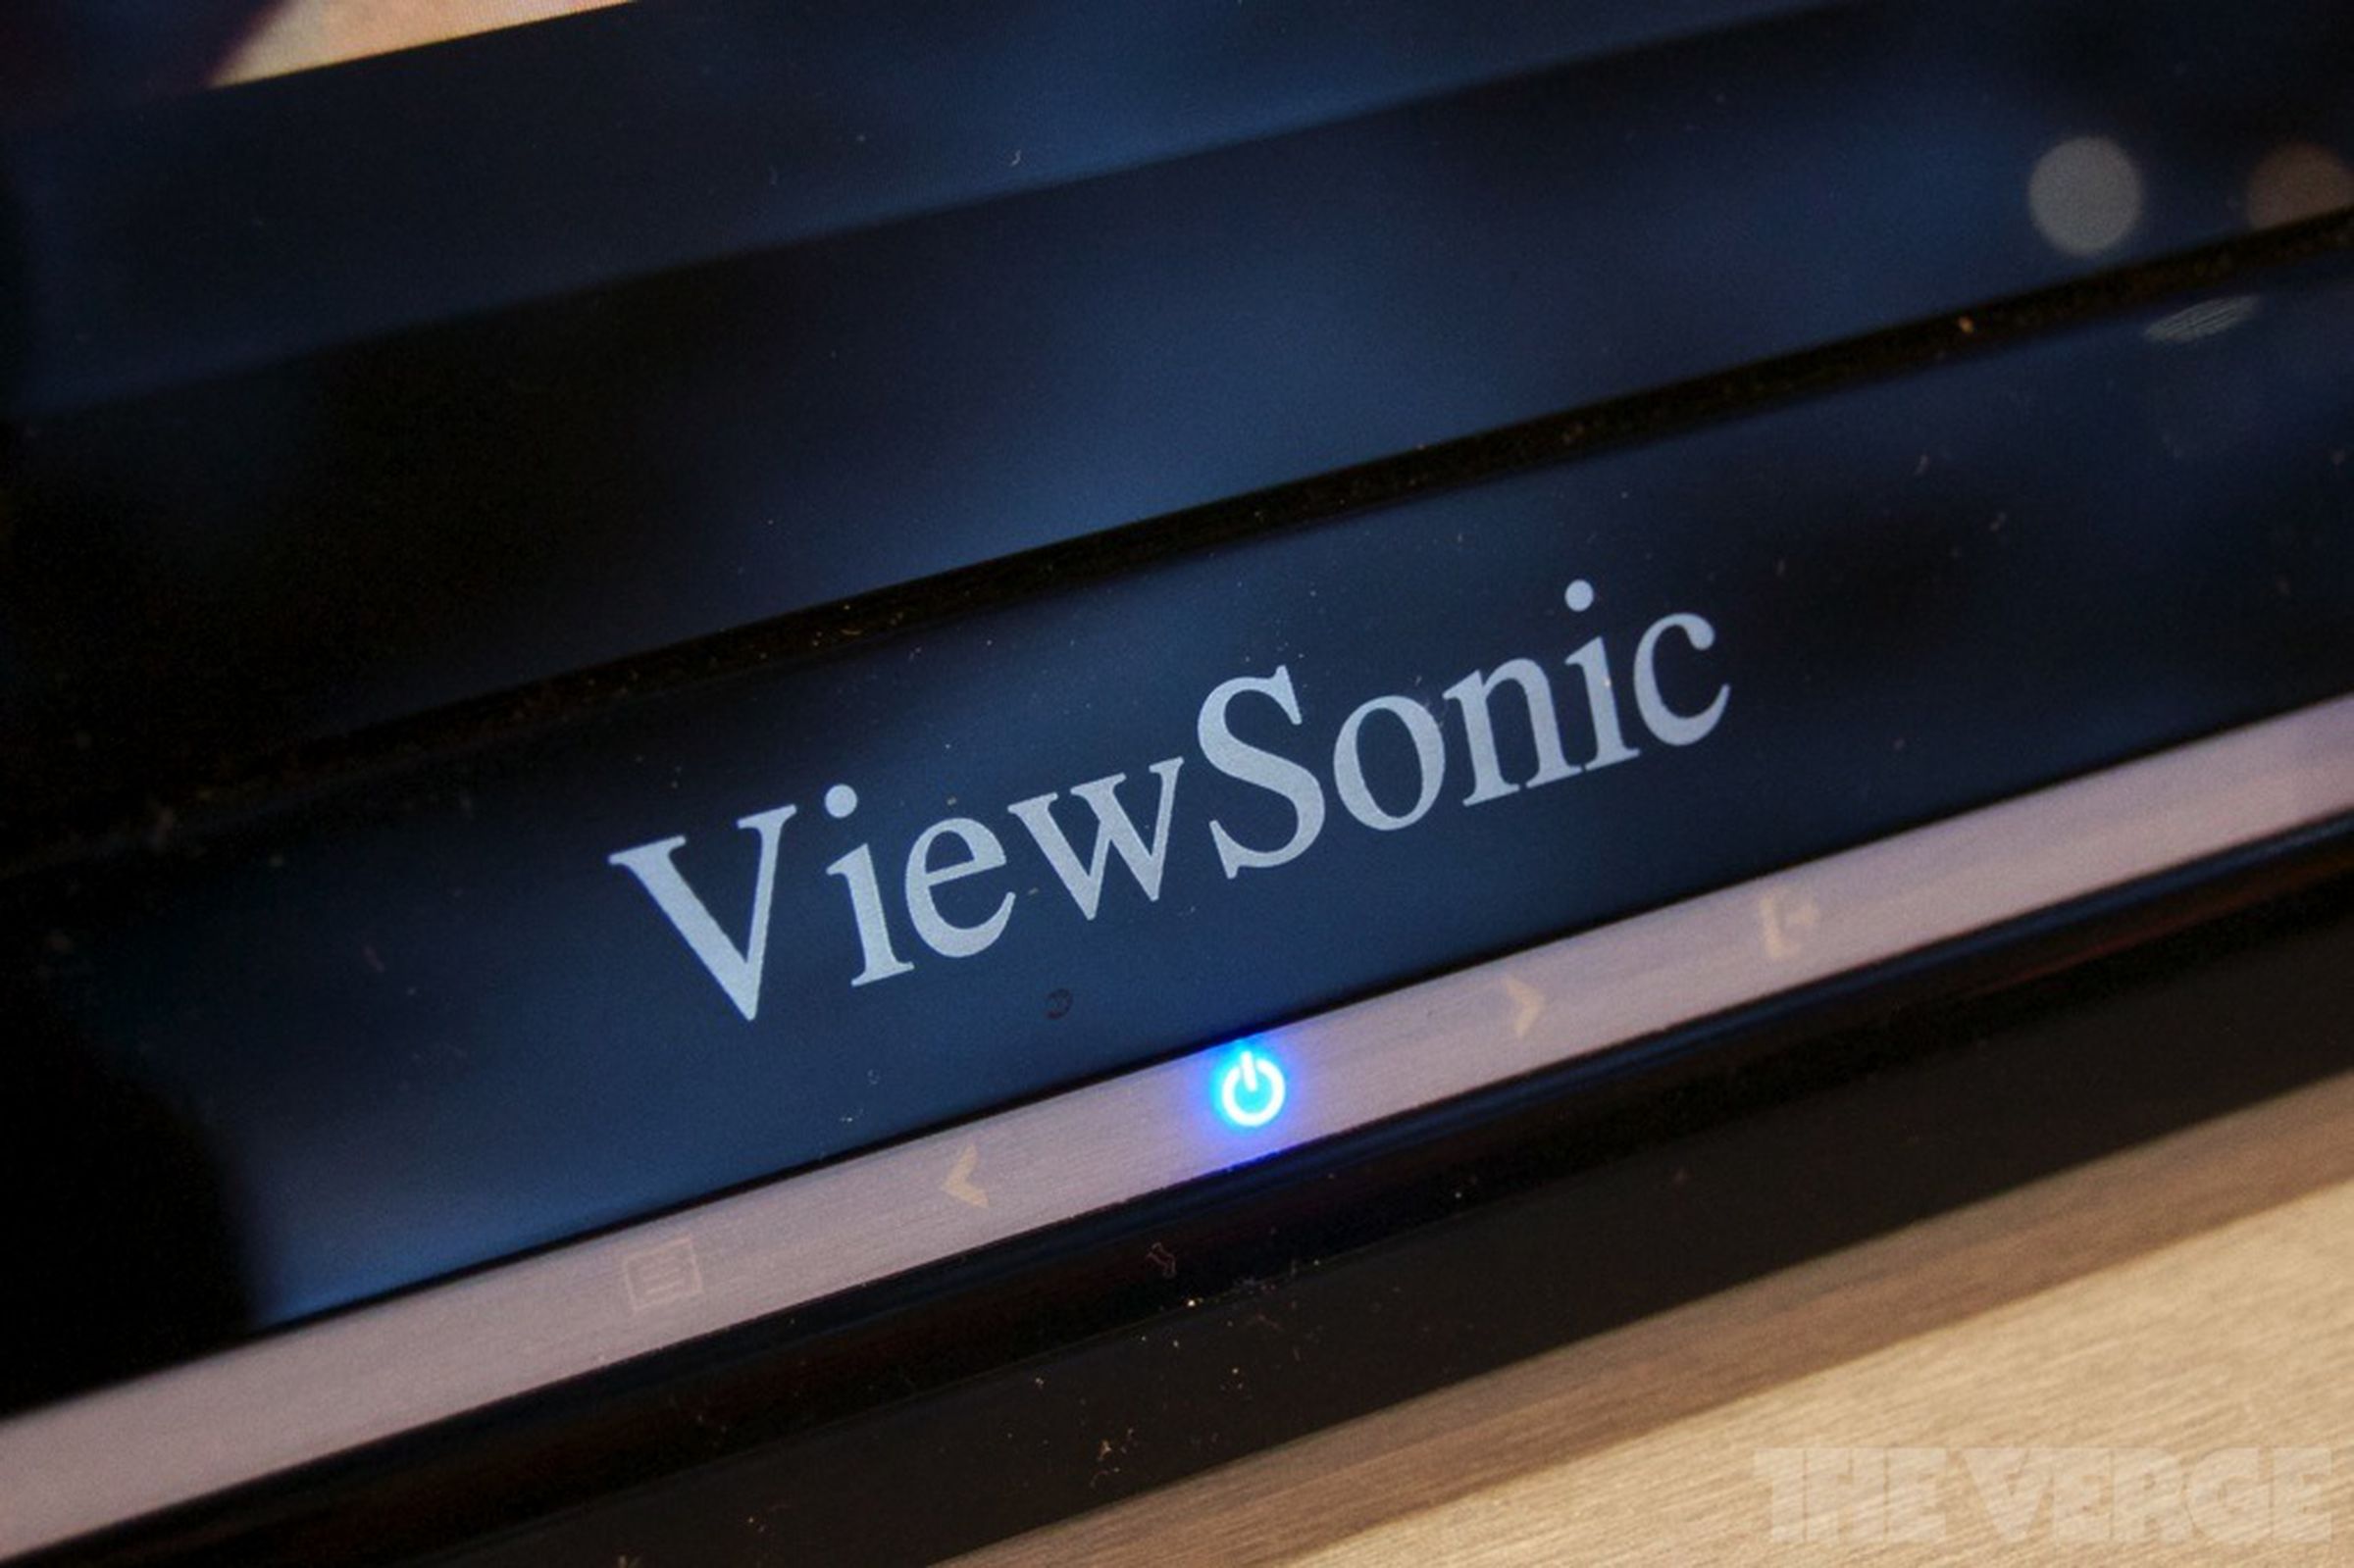 Viewsonic 24-inch Android display and 4K monitor prototype photos